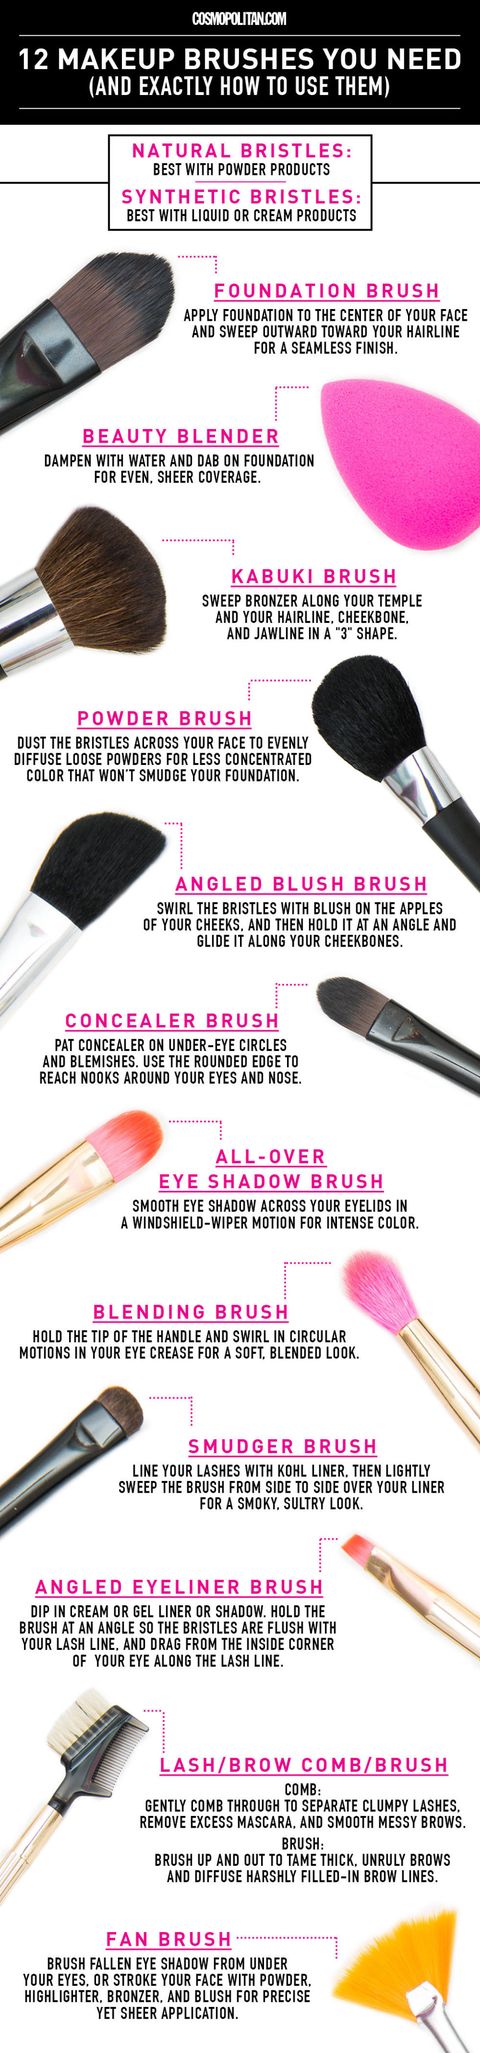 12 Makeup Brushes You Need And How To Use Them Build